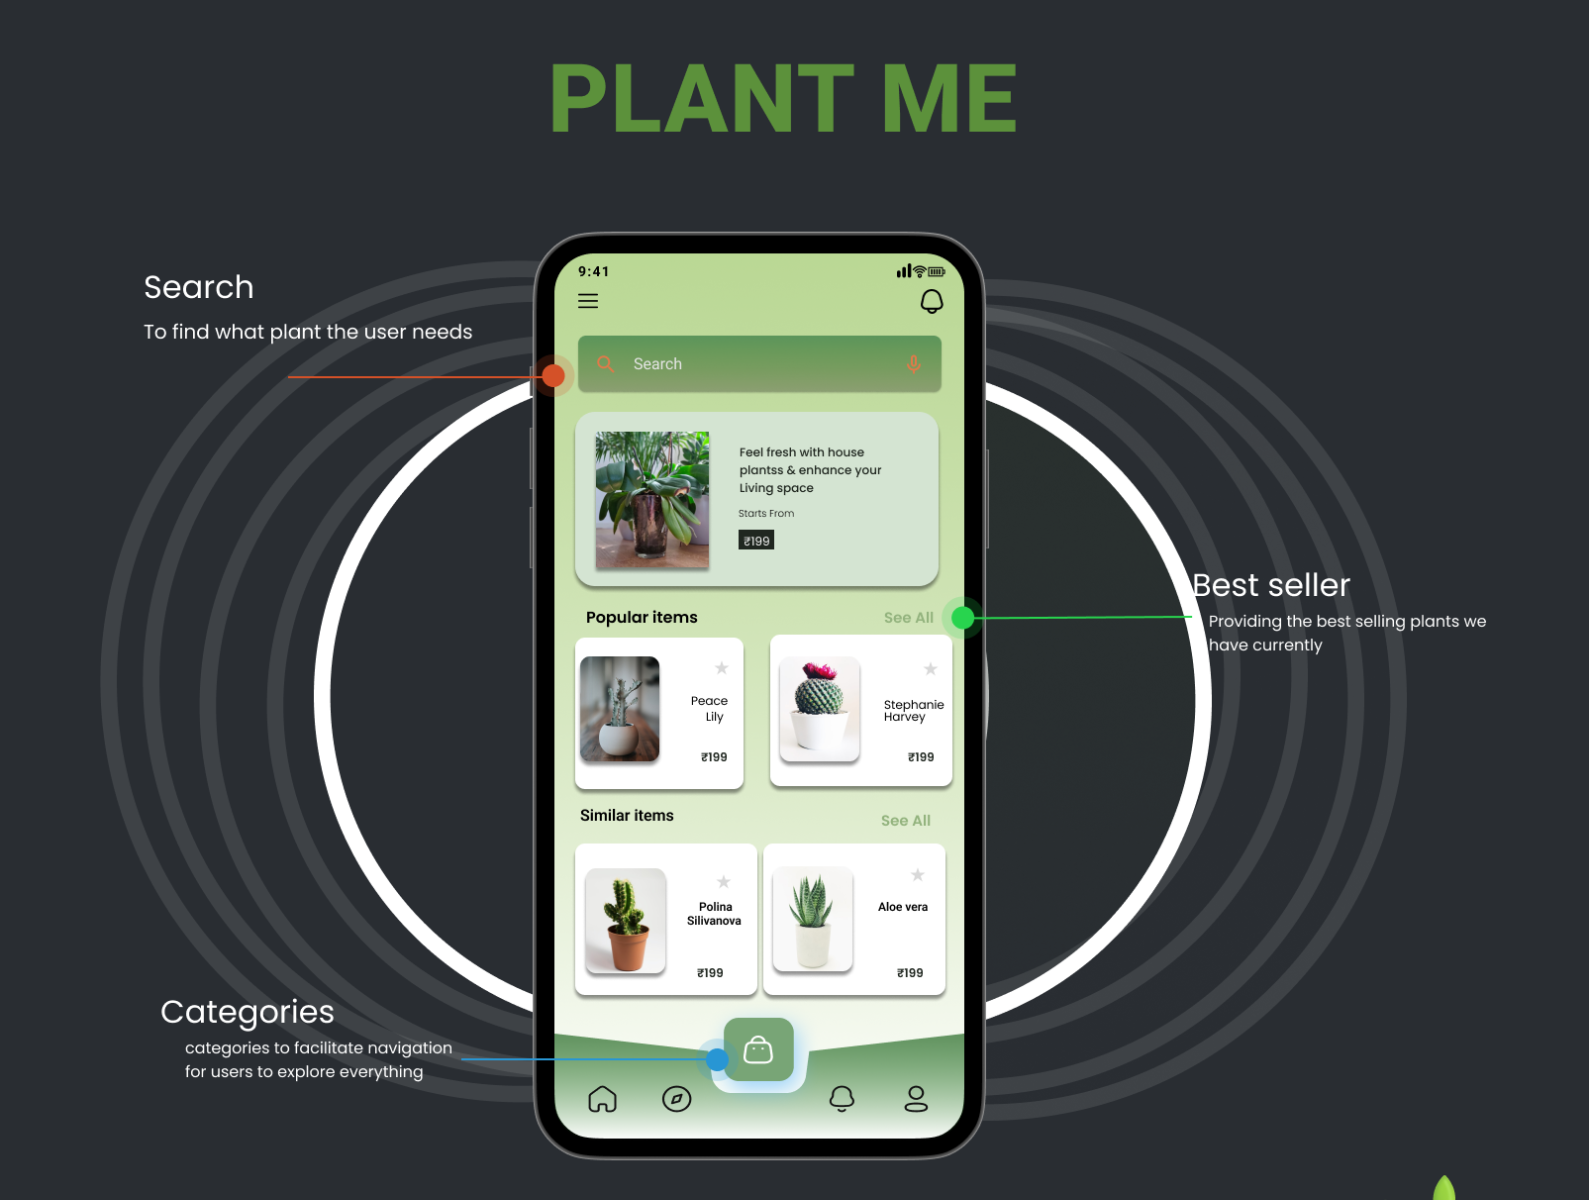 PLANT ME by Karpagam on Dribbble